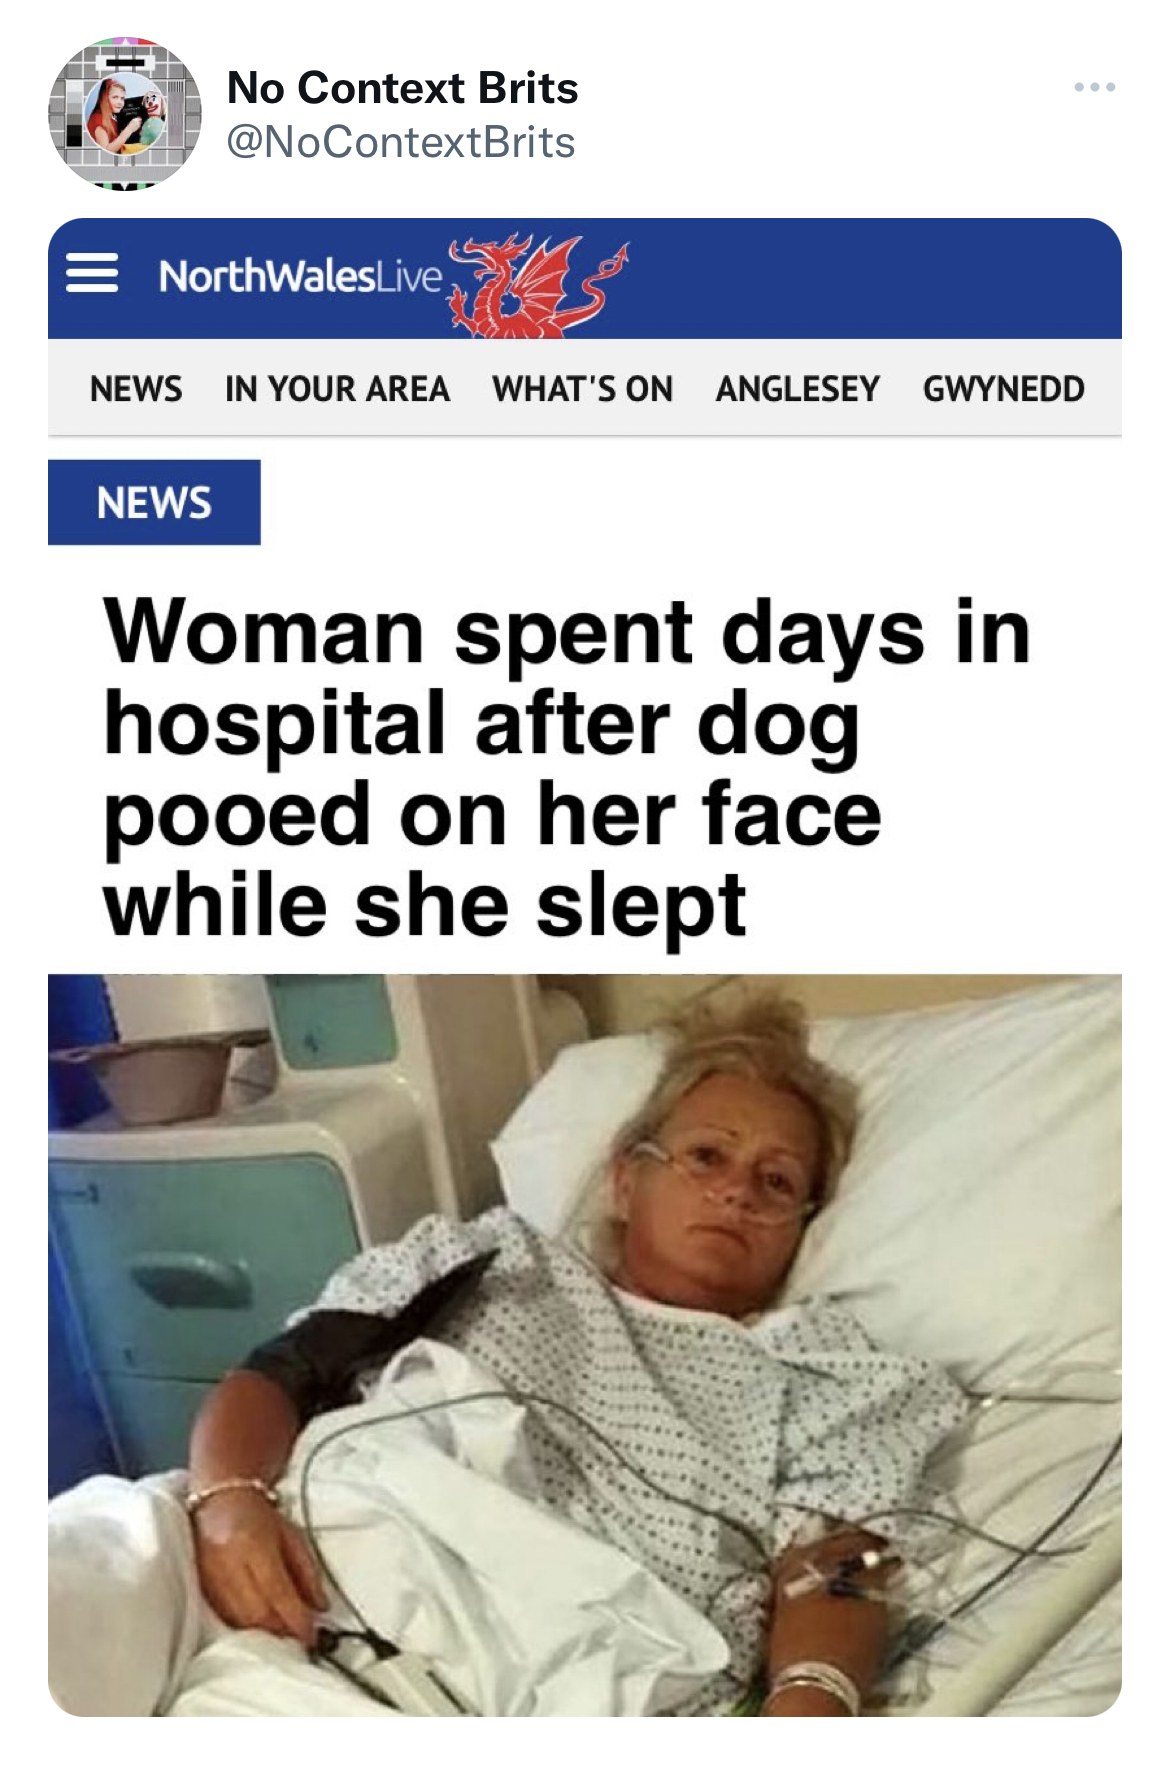 Funny tweets - media - No Context Brits NorthWales Live News In Your Area What'S On Anglesey Gwynedd News Woman spent days in hospital after dog pooed on her face while she slept